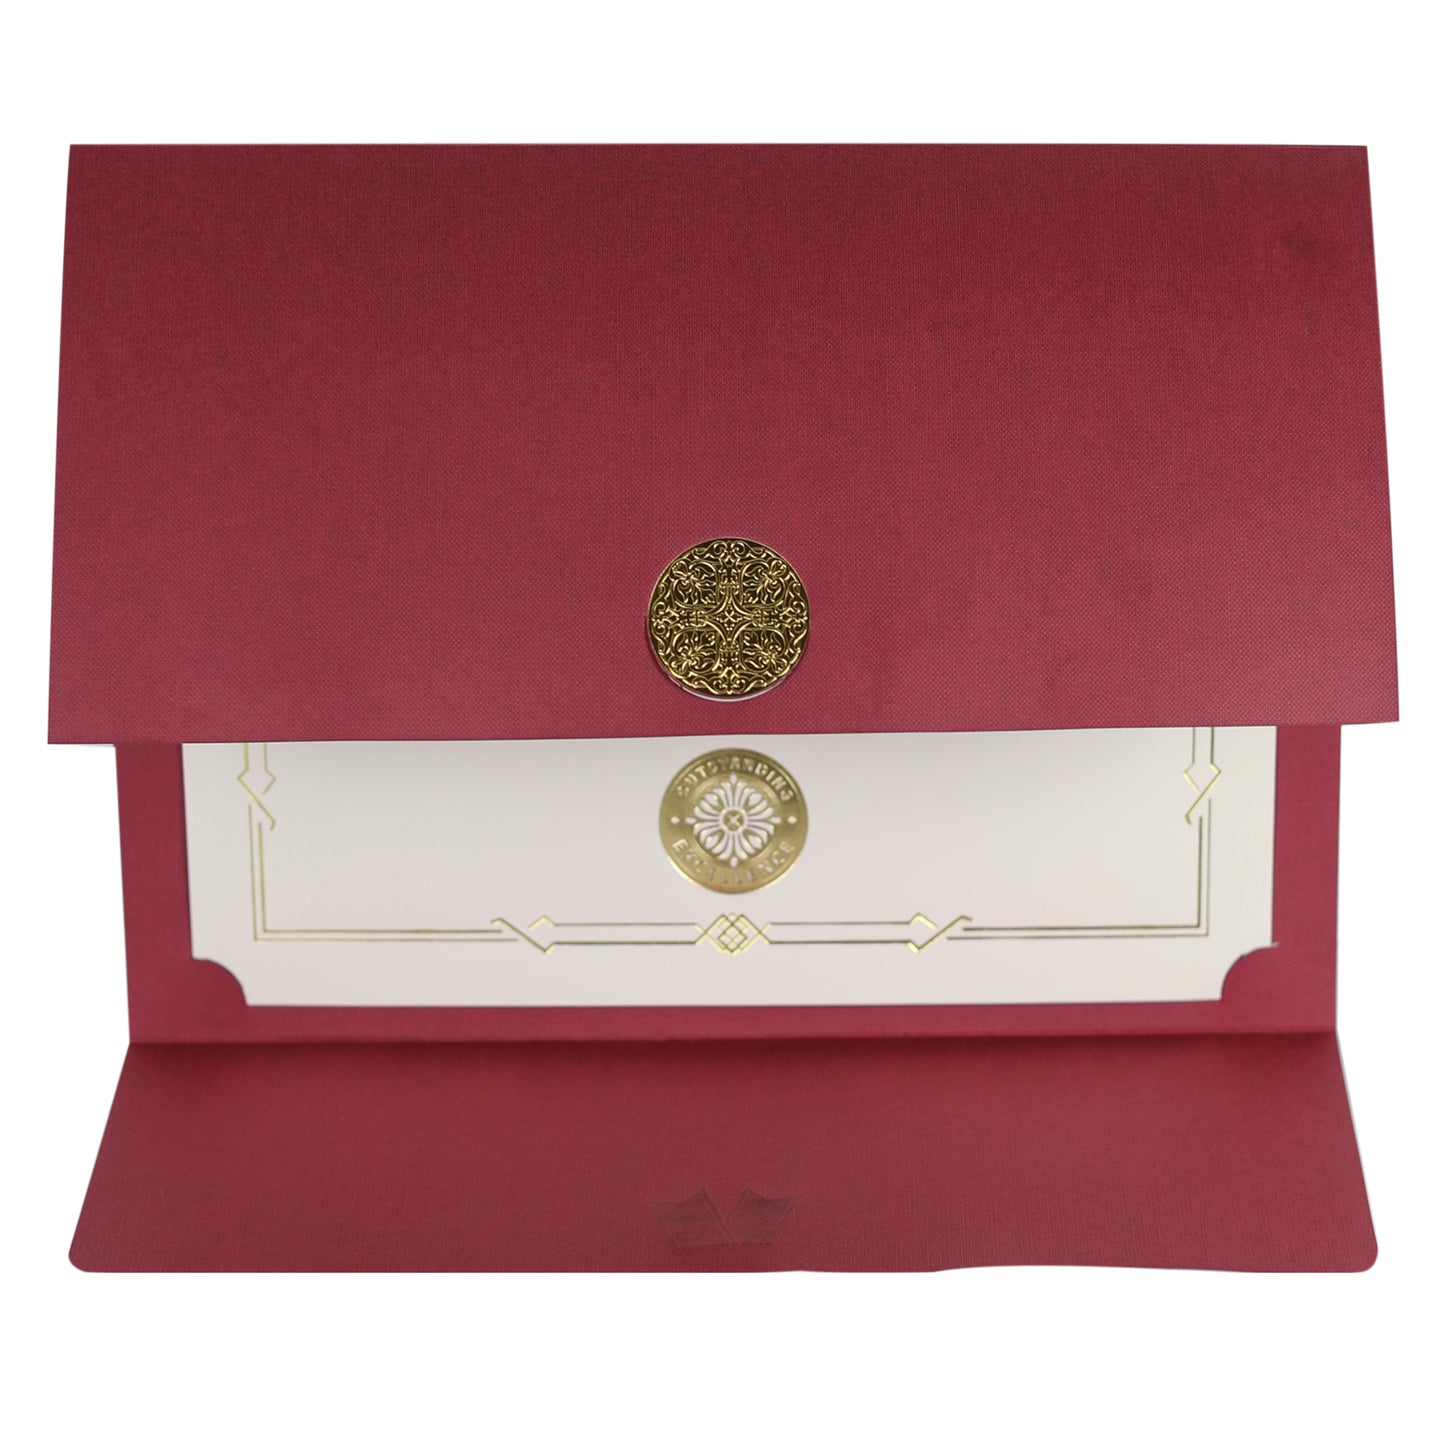 St. James® Certificate Holders/Document Covers/Diploma Holders, Burgundy, Gold Award Seal with Blue Ribbon, Pack of 5, 83817